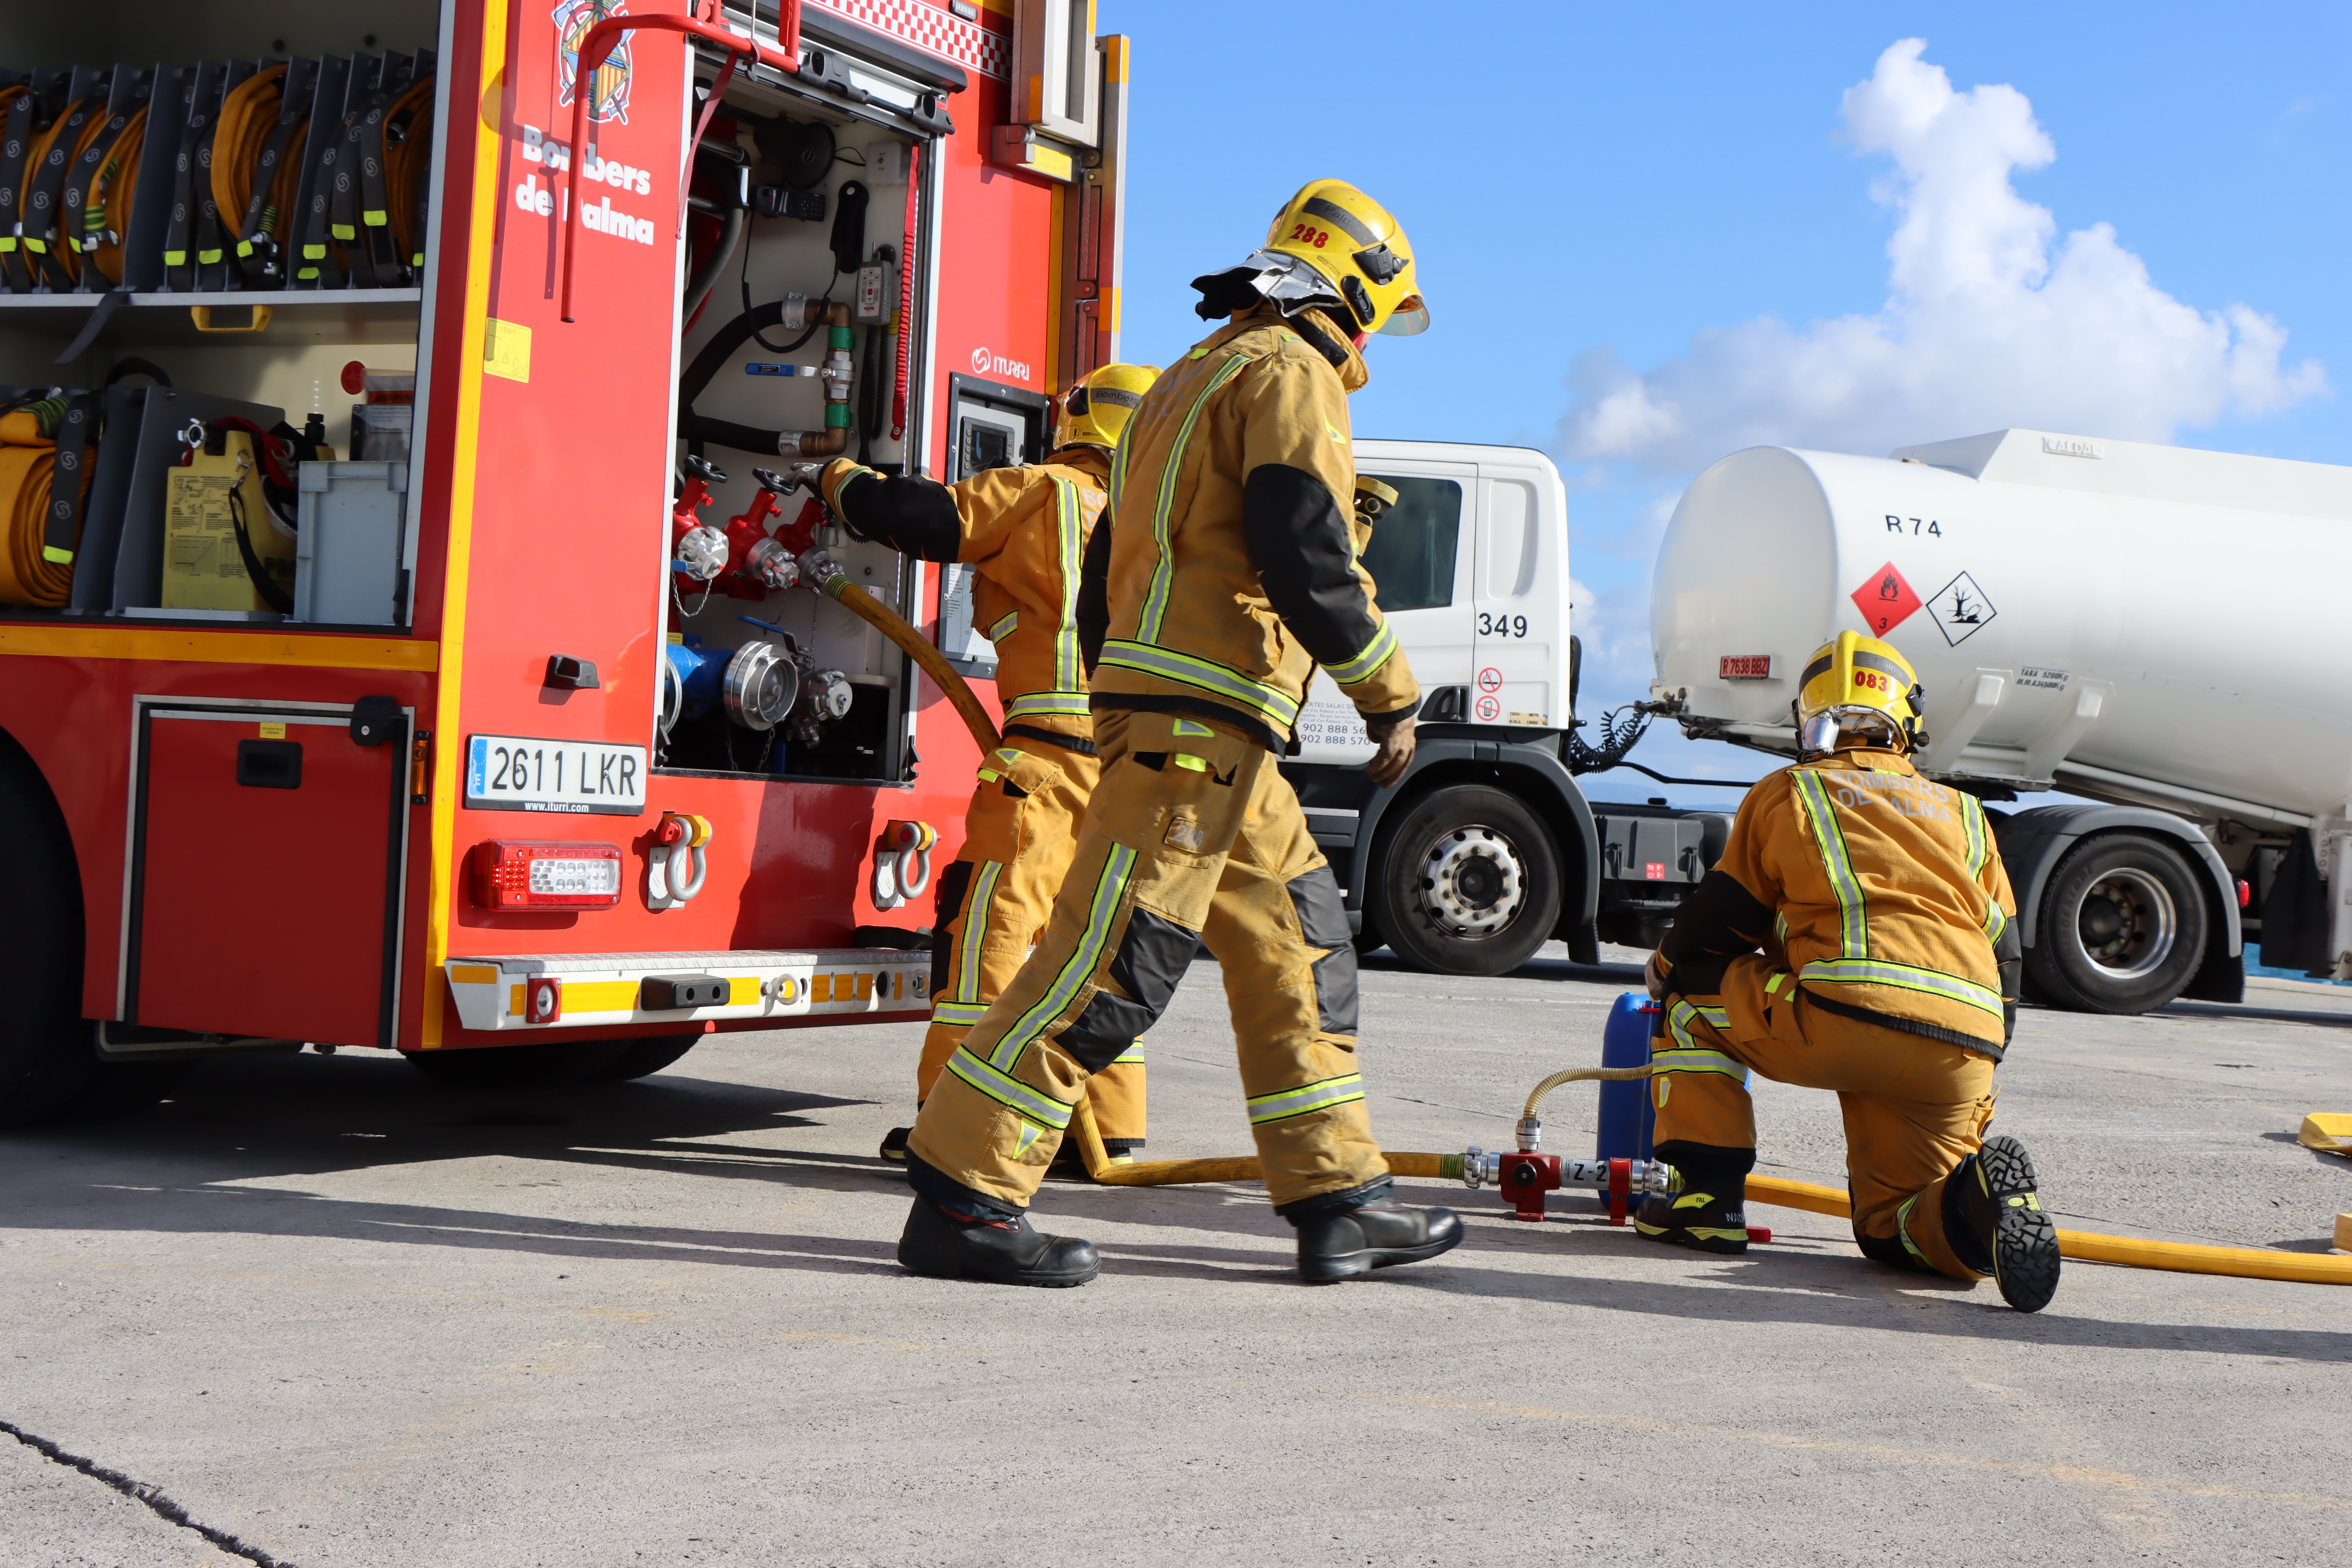 A drill to detect explosive devices was carried out in the port of Palma